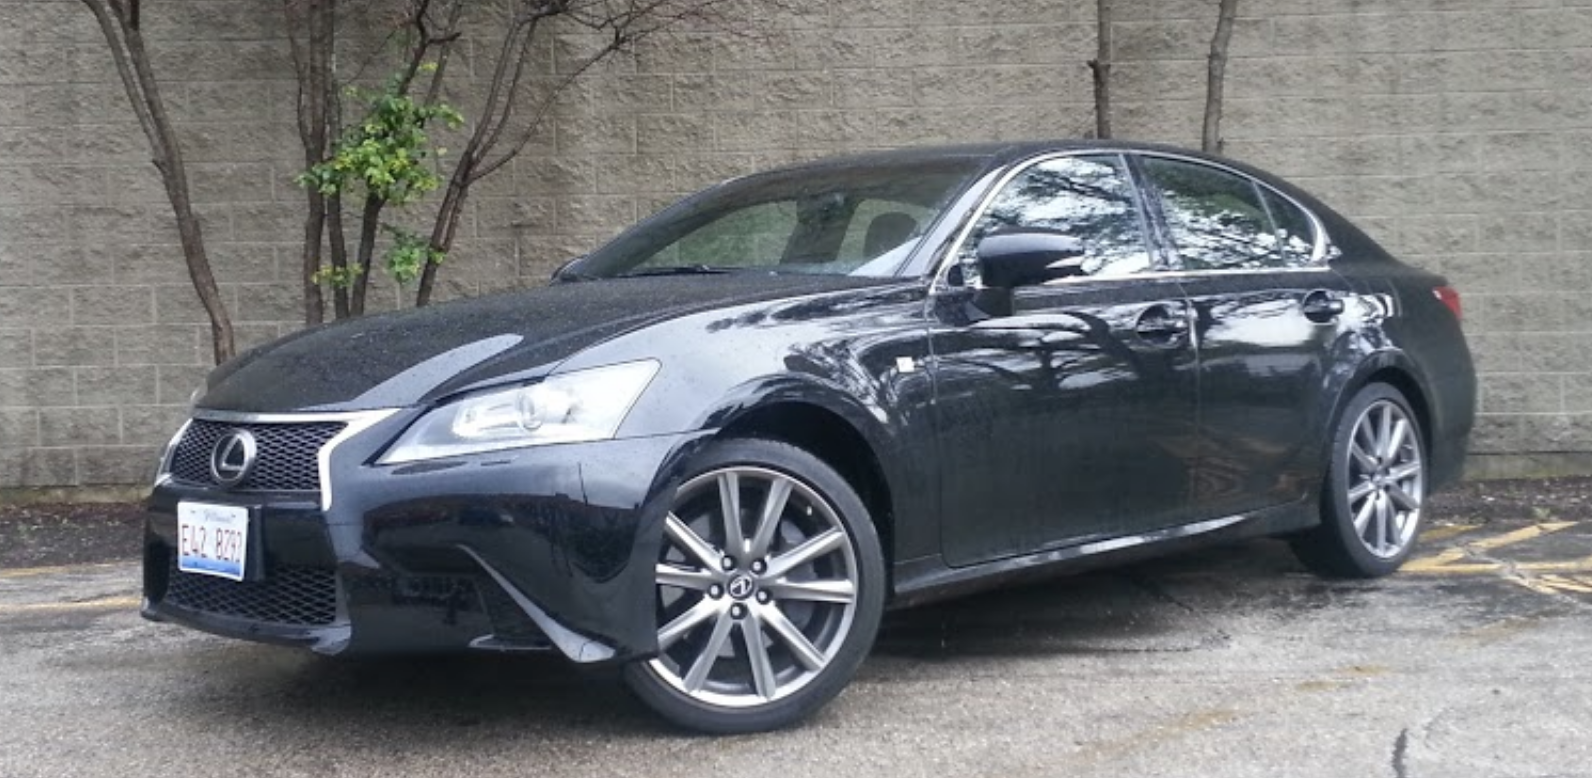 Test Drive 2015 Lexus Gs 350 Awd F Sport The Daily Drive Consumer Guide The Daily Drive Consumer Guide